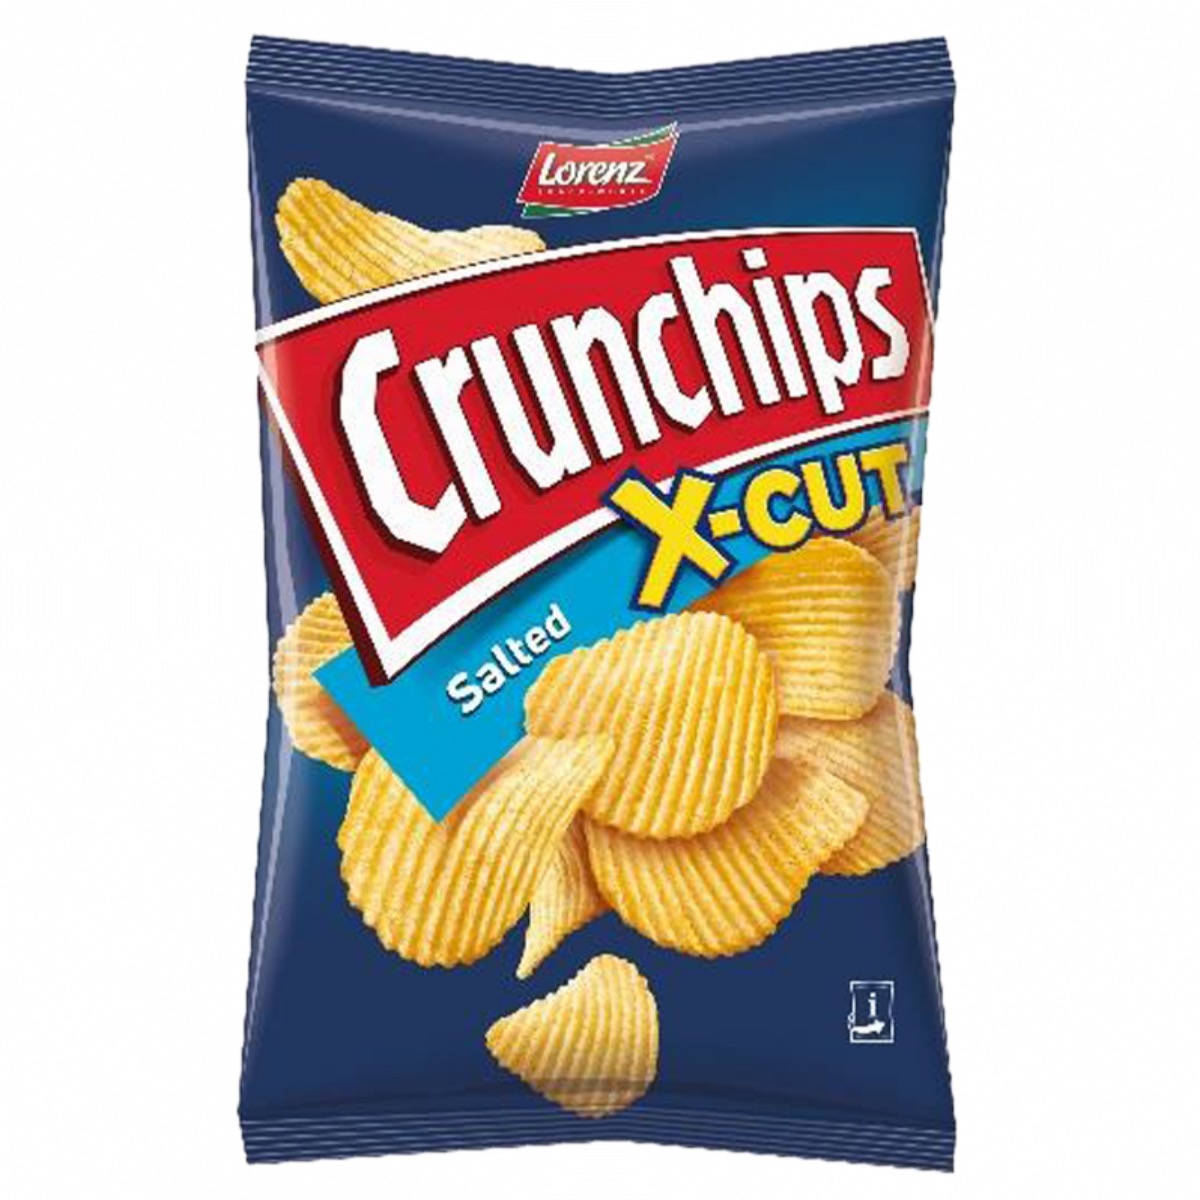 Picture of Lorenz Crunchips X-Cut Salted